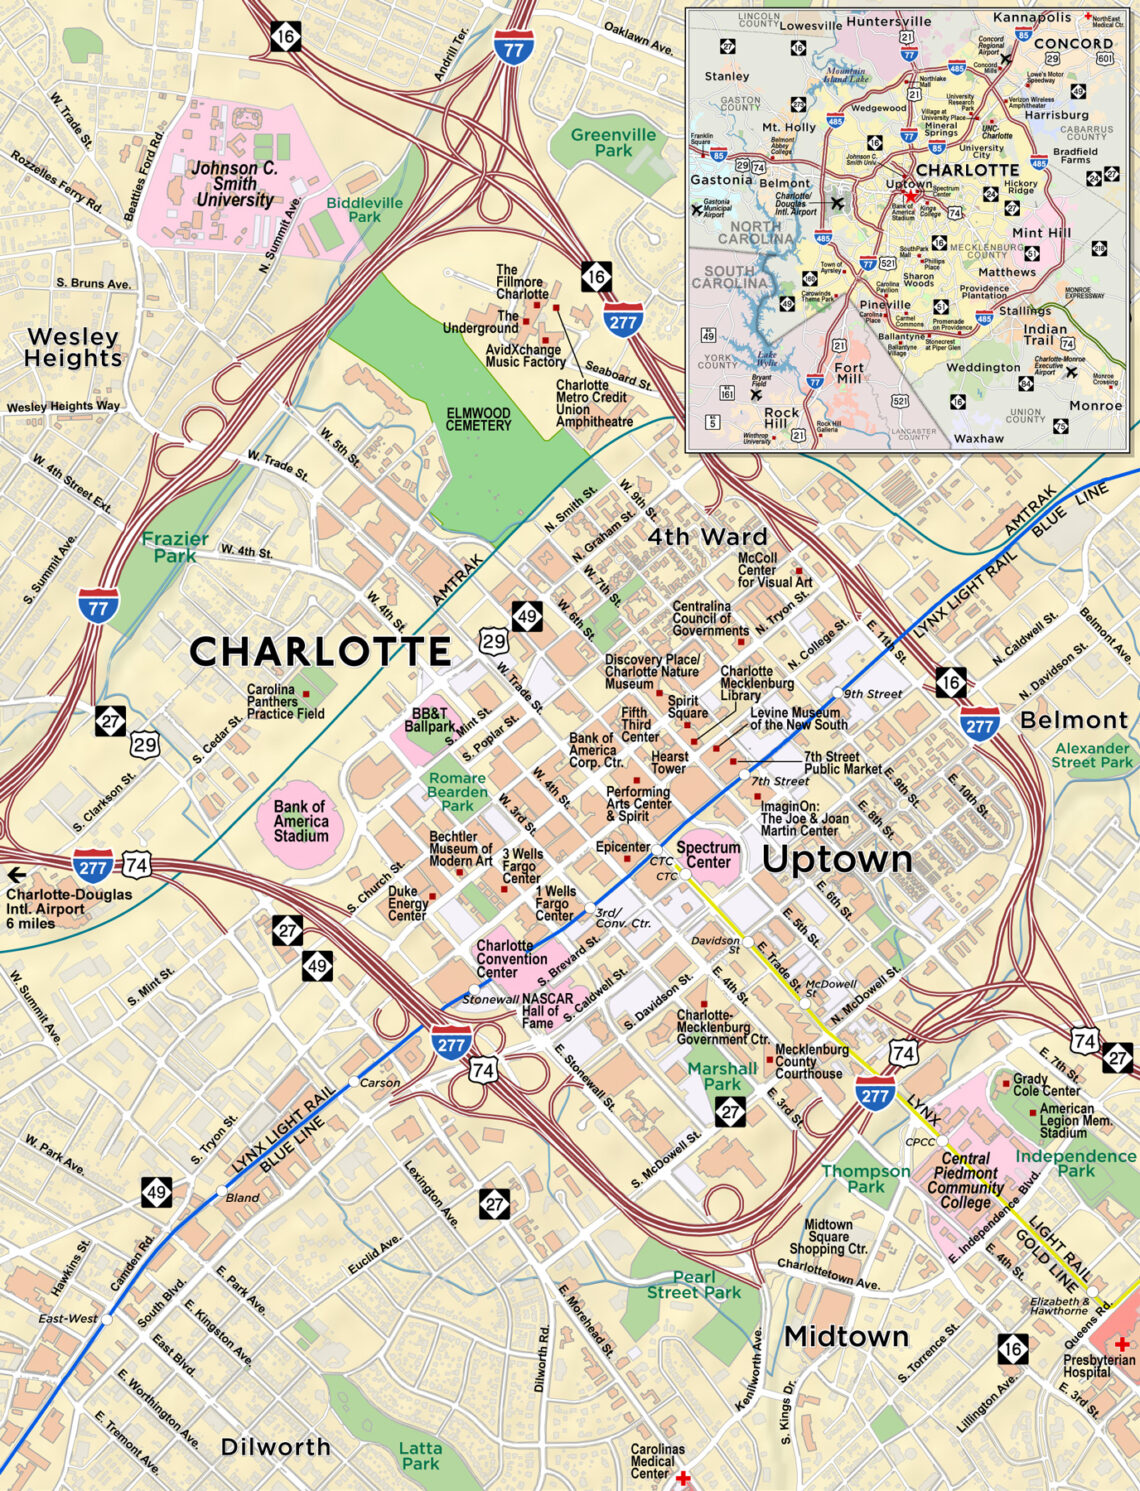 Custom Mapping & GIS Services in Charlotte, NC Metro Area - Red Paw Technologies